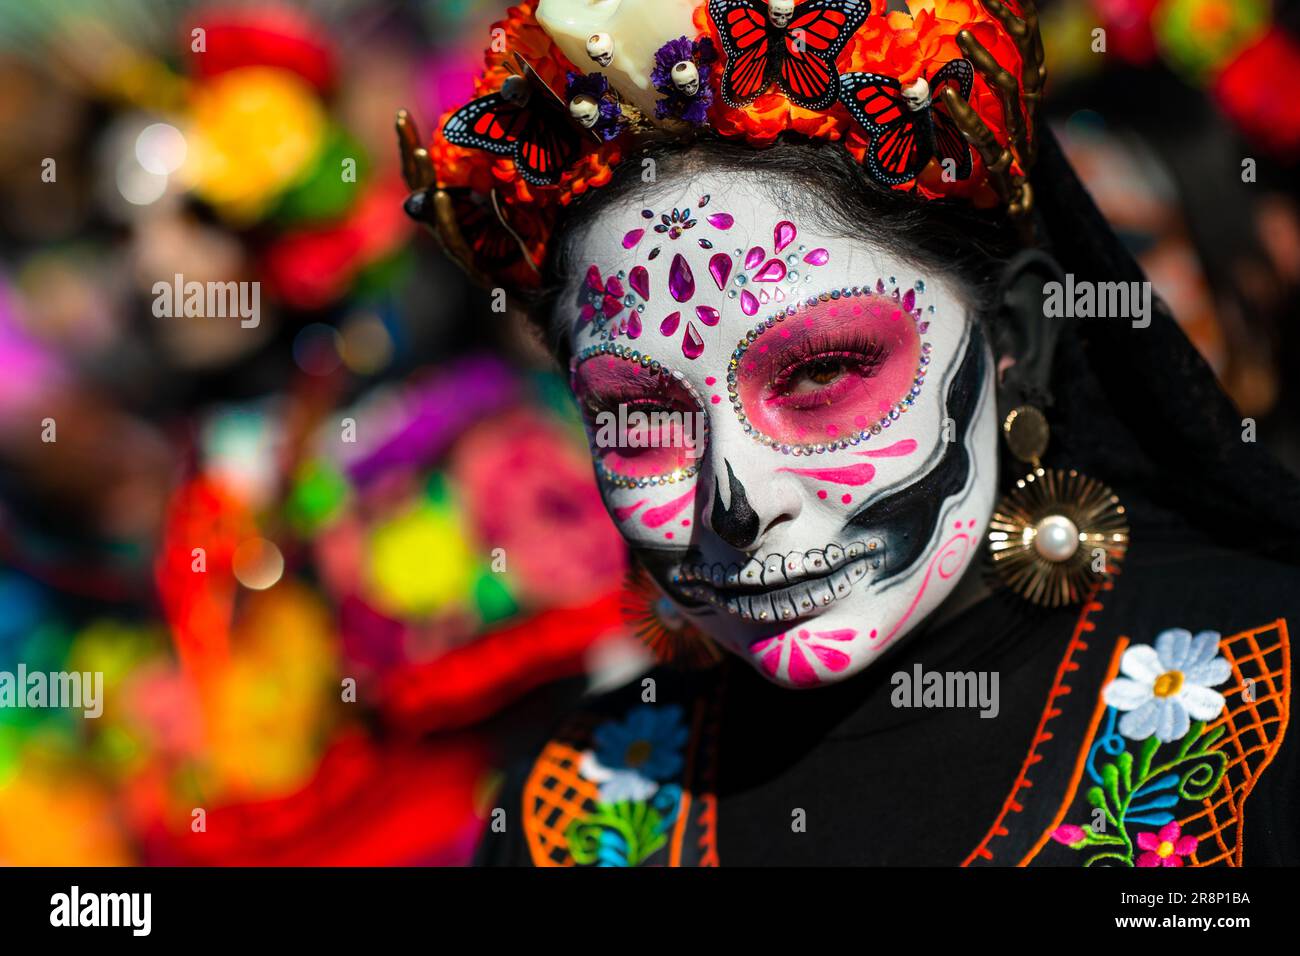 A young Mexican woman, dressed as La Catrina, takes part in the Day of the Dead festivities in Guadalajara, Mexico. Stock Photo